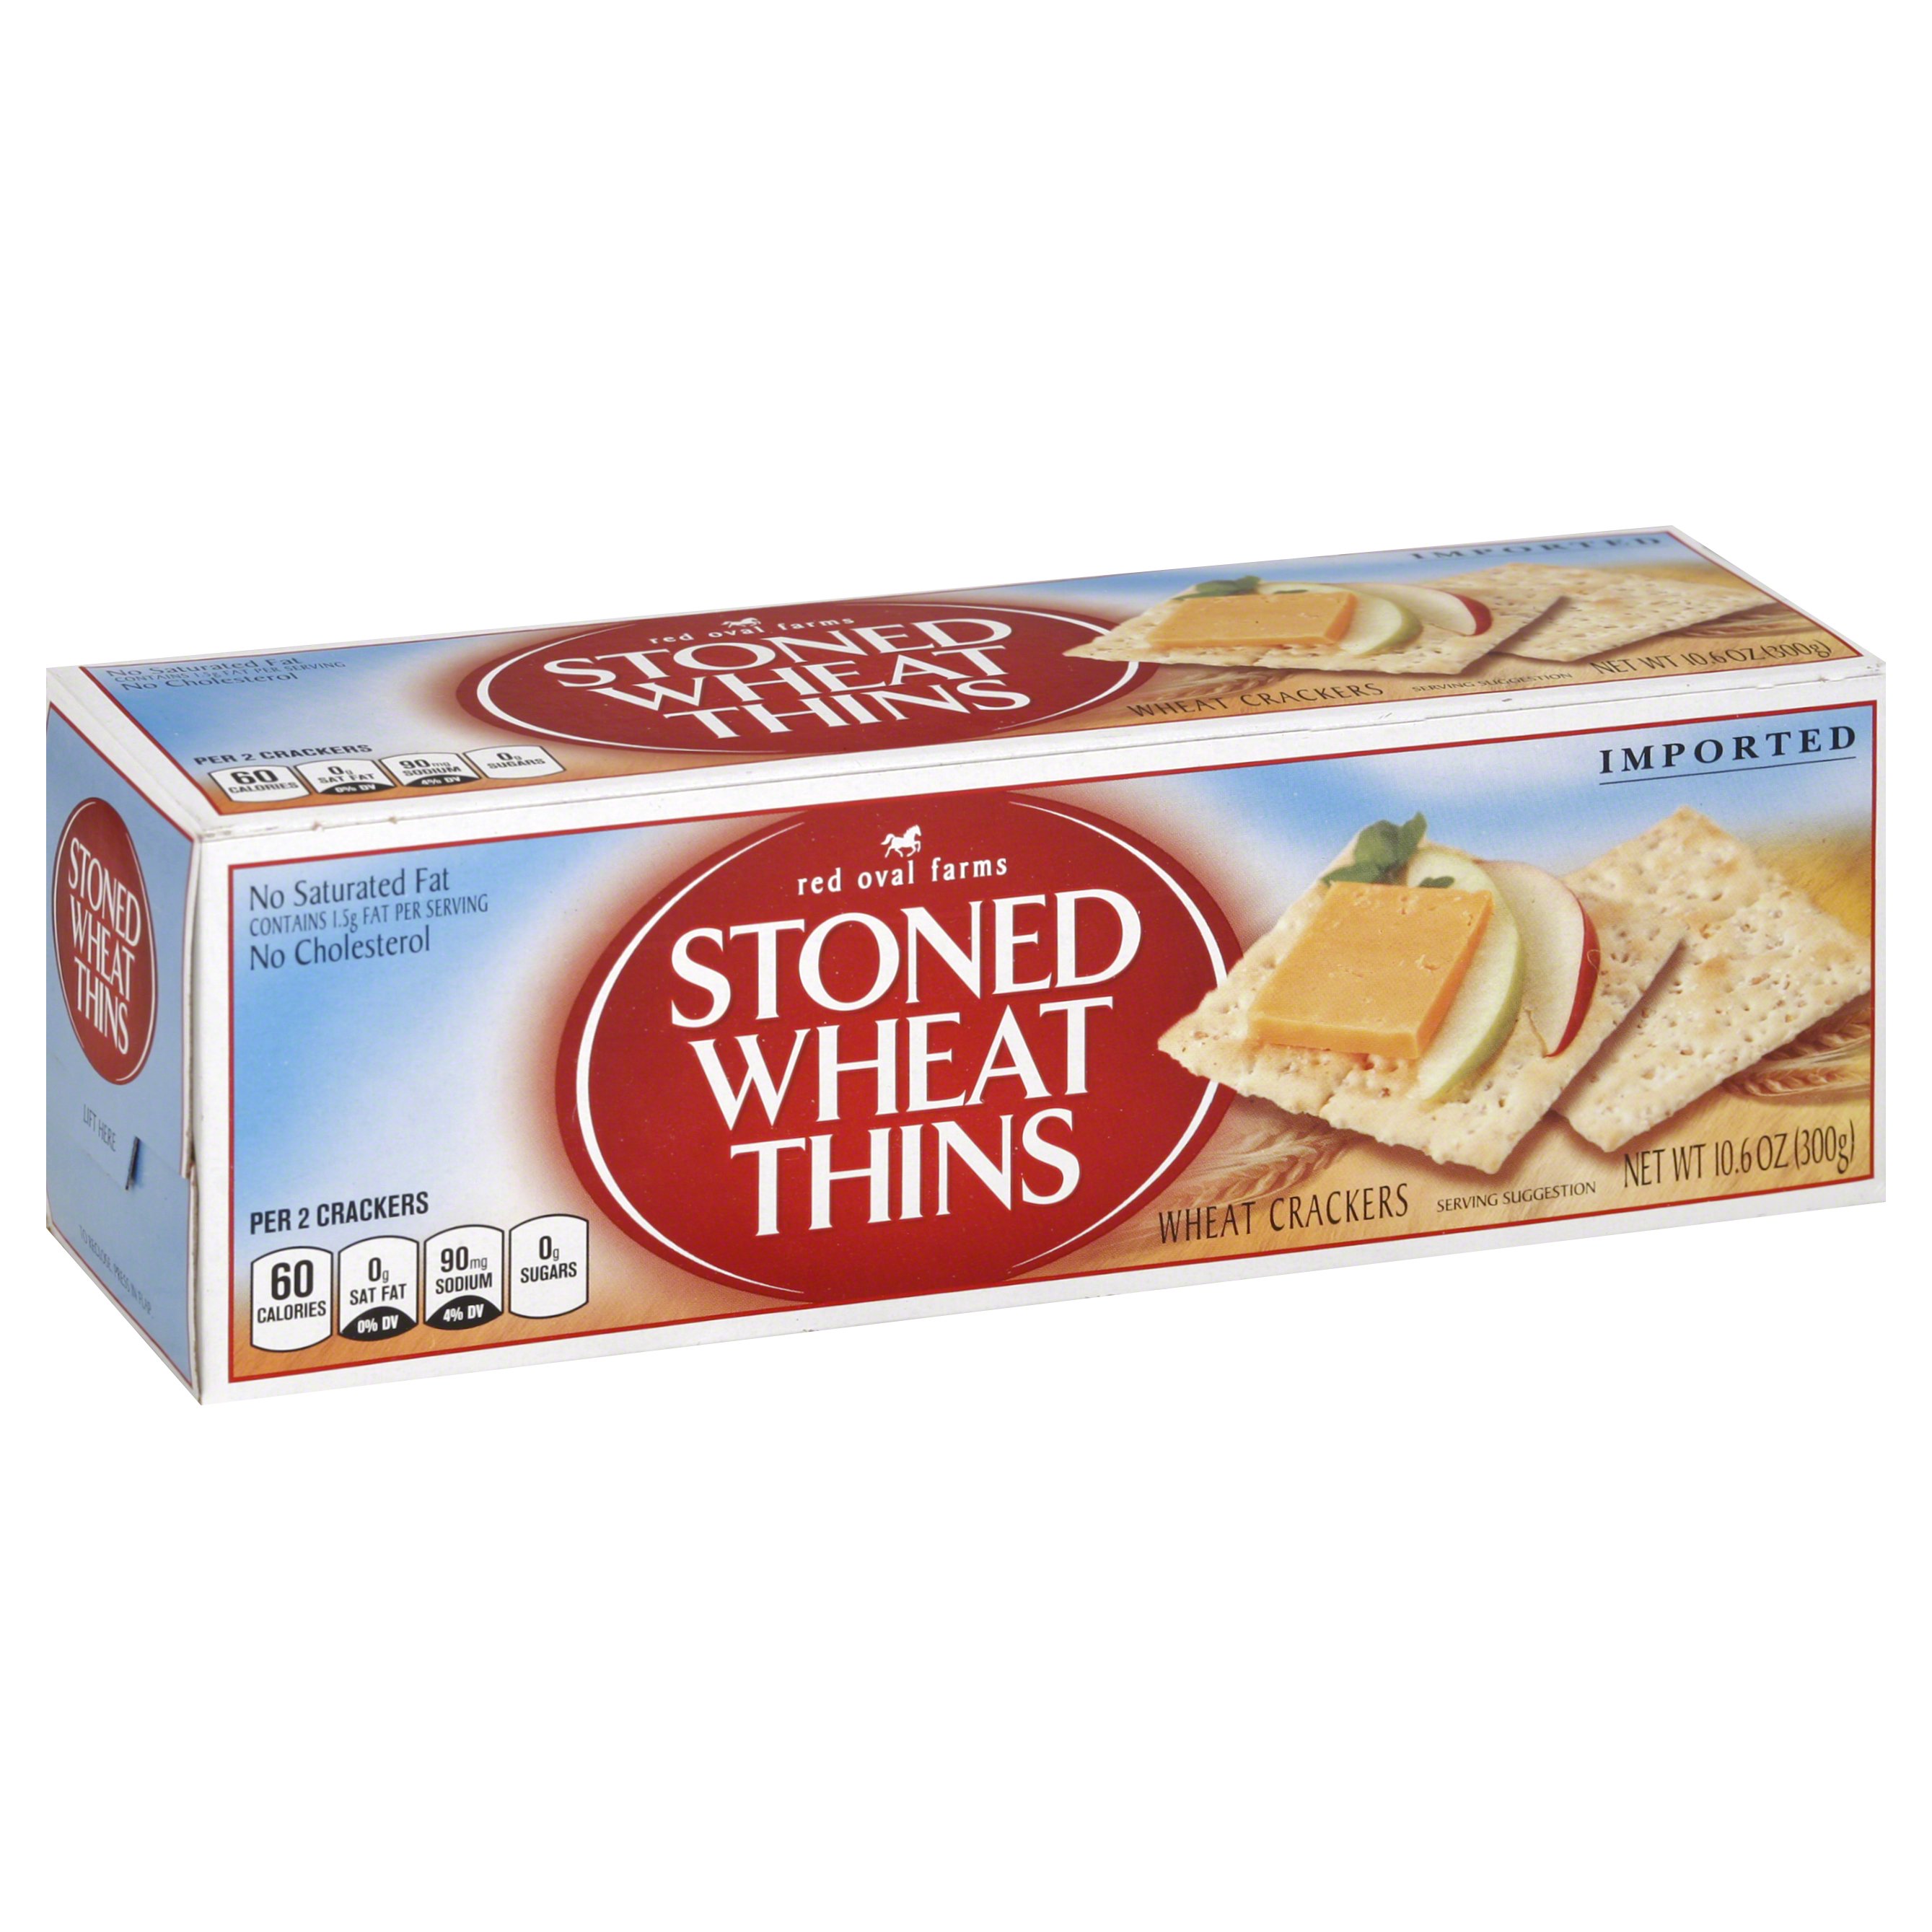 Red Oval Farms Stoned Wheat Thins Wheat Crackers 10.6 OZ